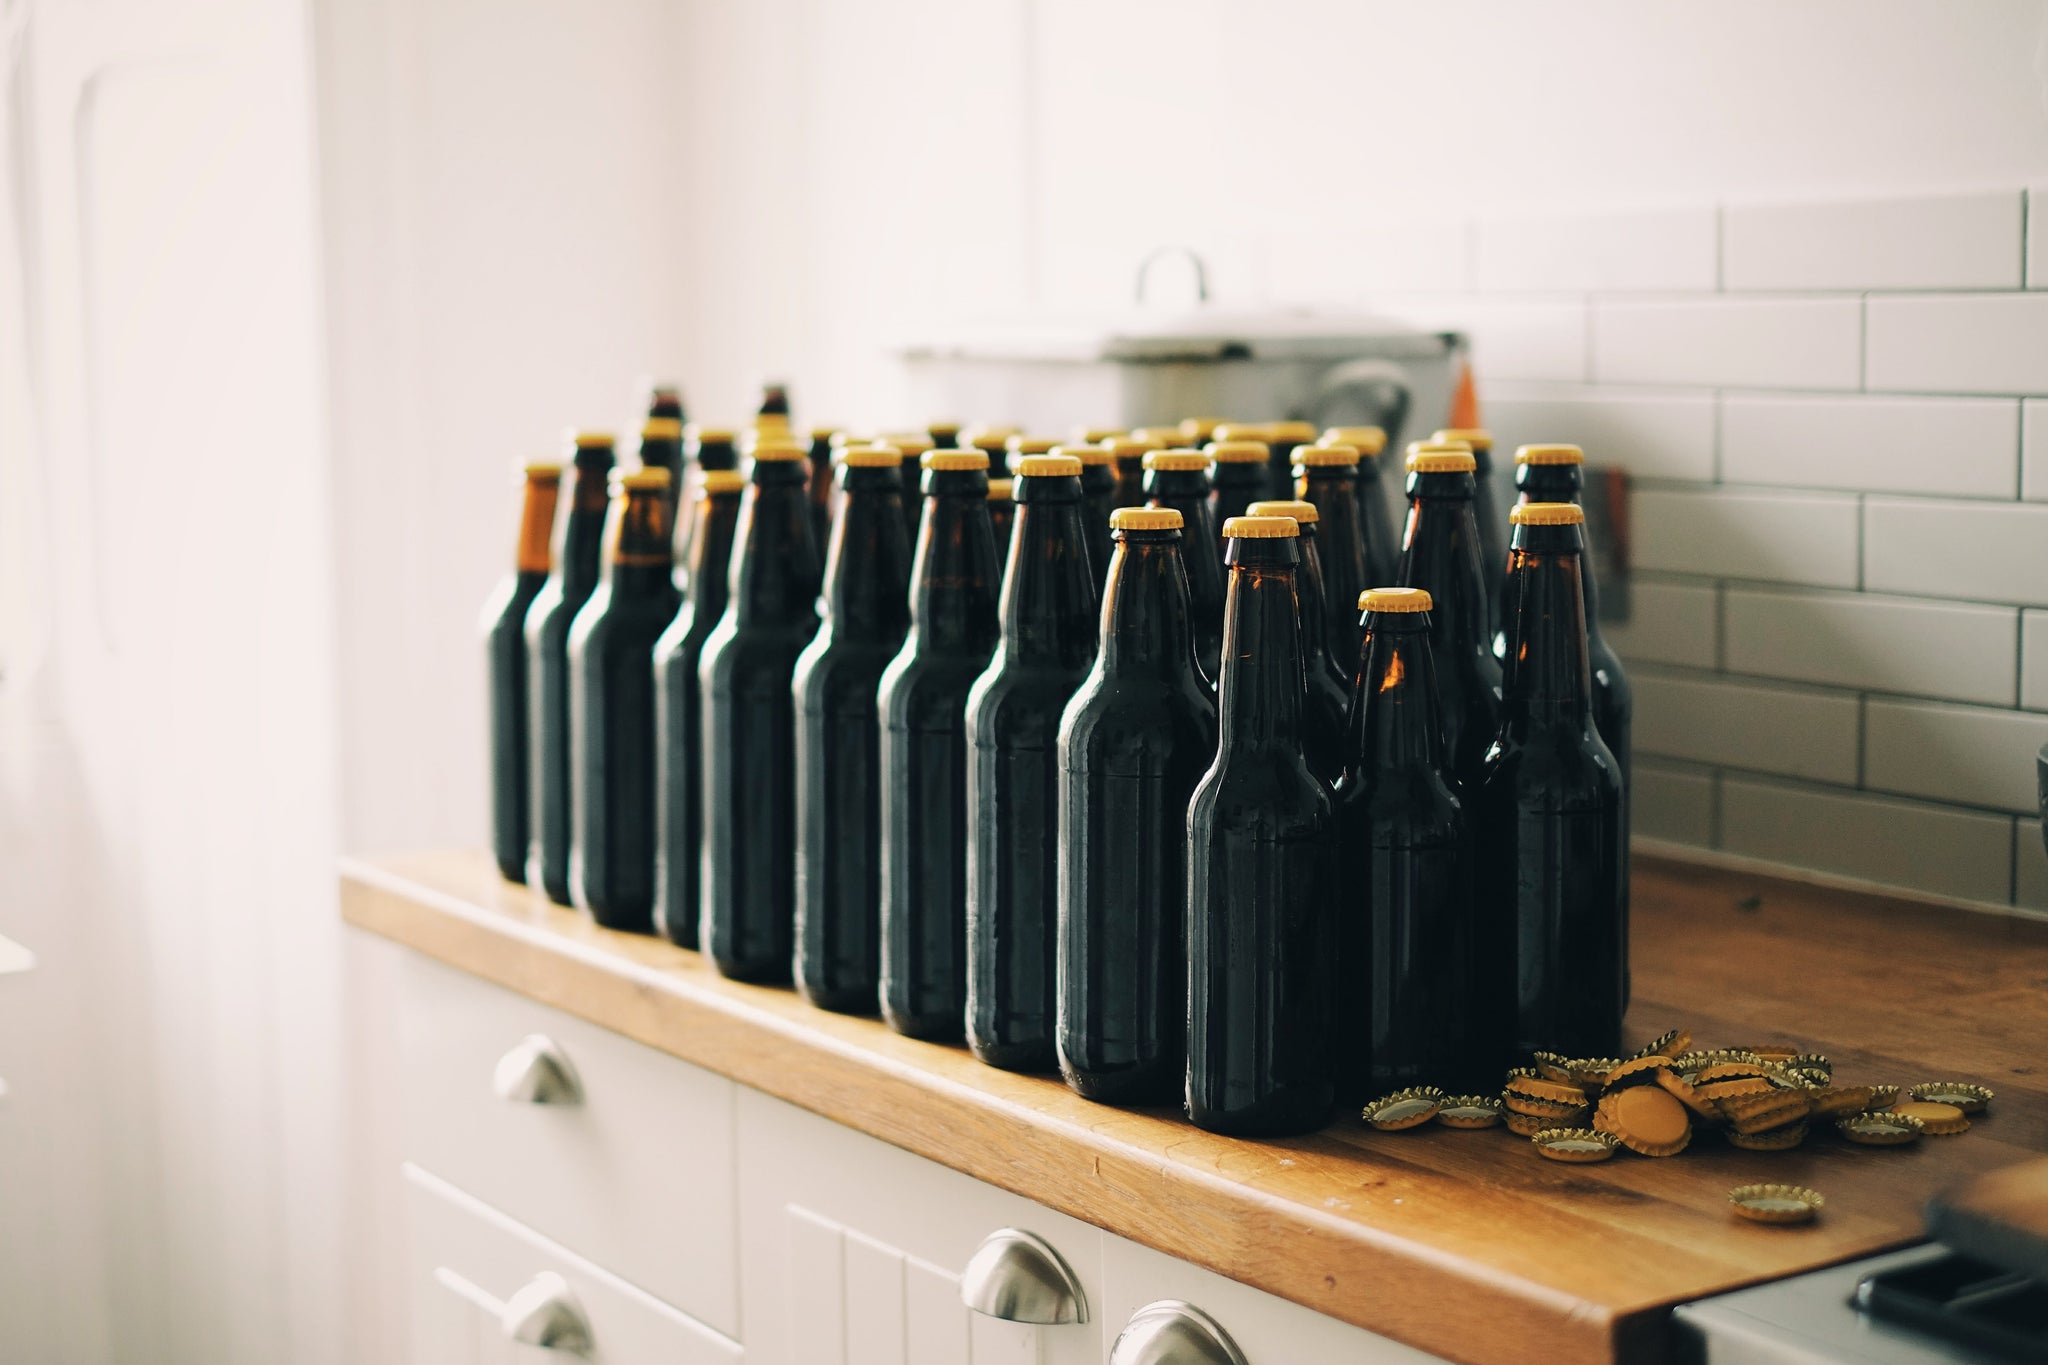 How To Brew Your Own Beer 101